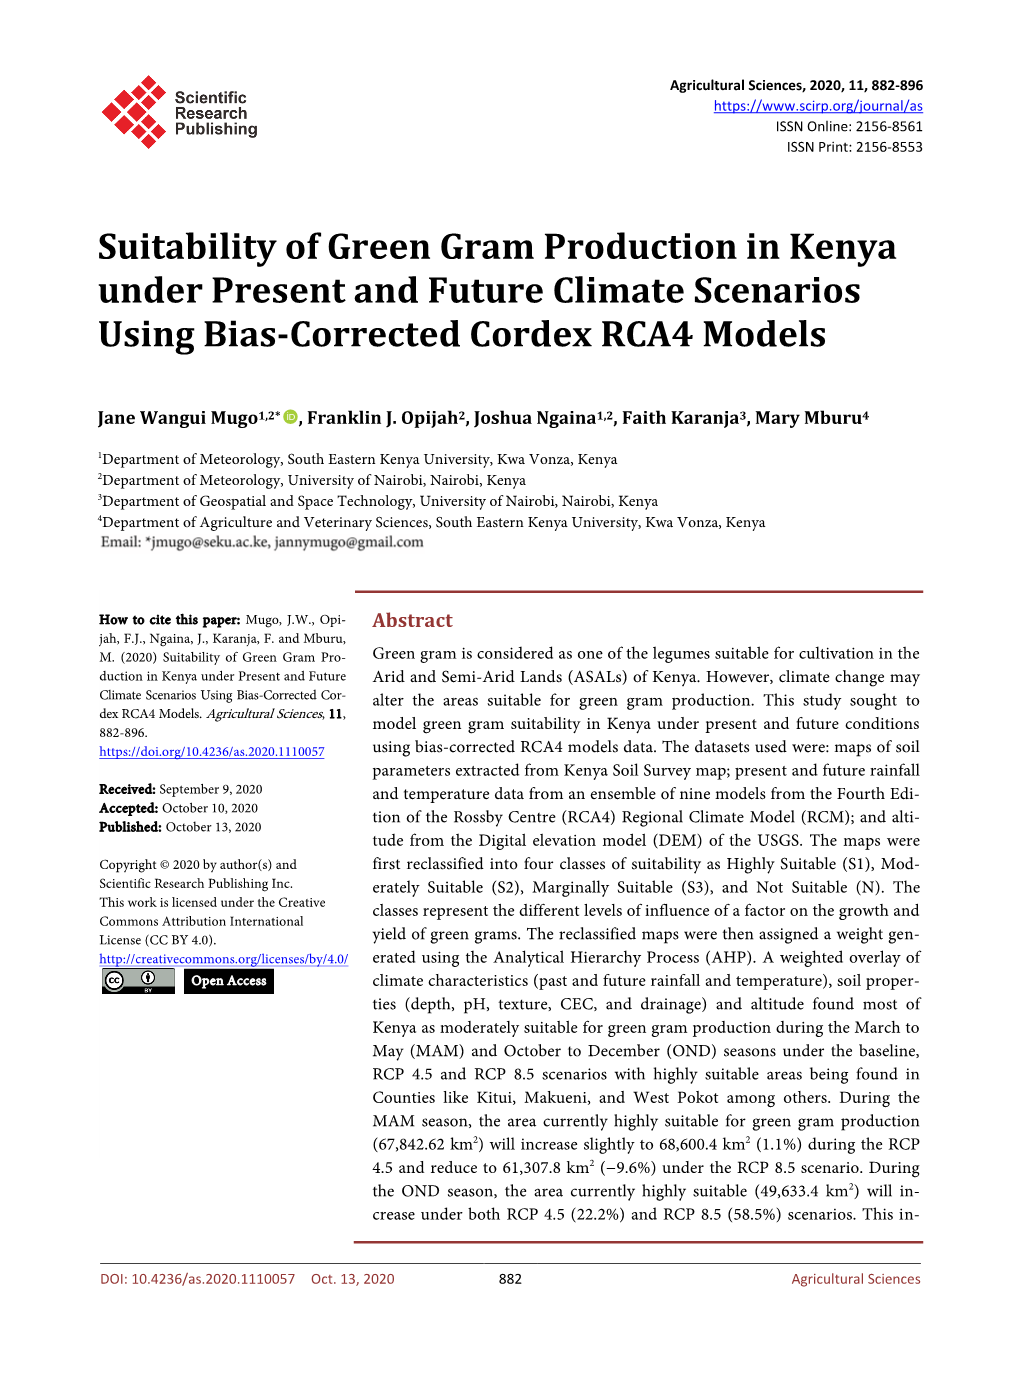 Suitability of Green Gram Production in Kenya Under Present and Future Climate Scenarios Using Bias-Corrected Cordex RCA4 Models